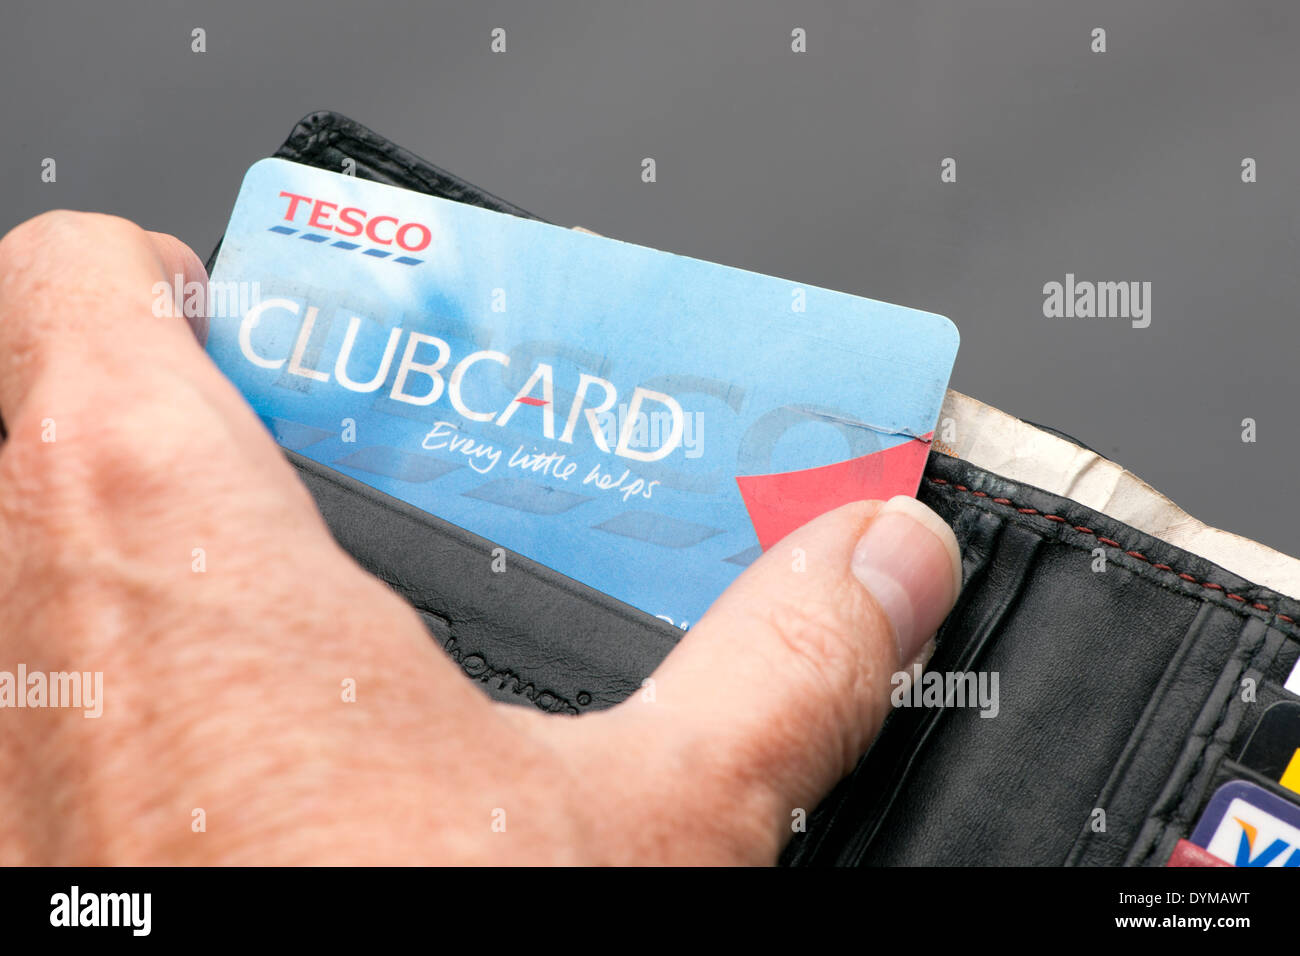 hand taking a Tesco Clubcard out of a wallet Stock Photo